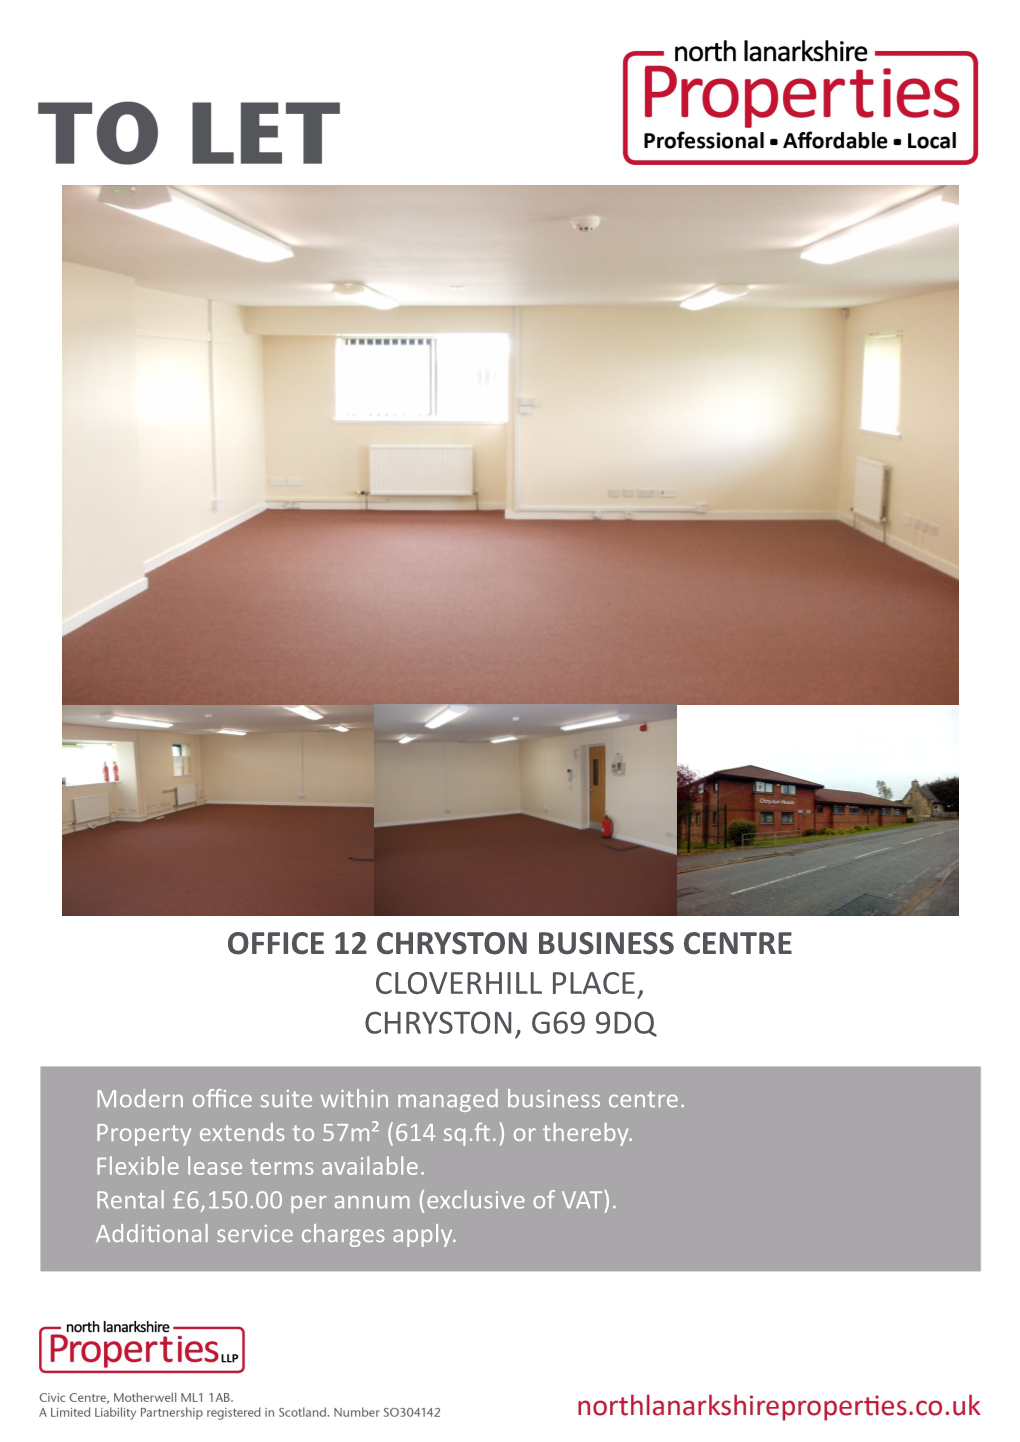 Office 12 Chryston Business Centre Cloverhill Place, Chryston, G69 9Dq